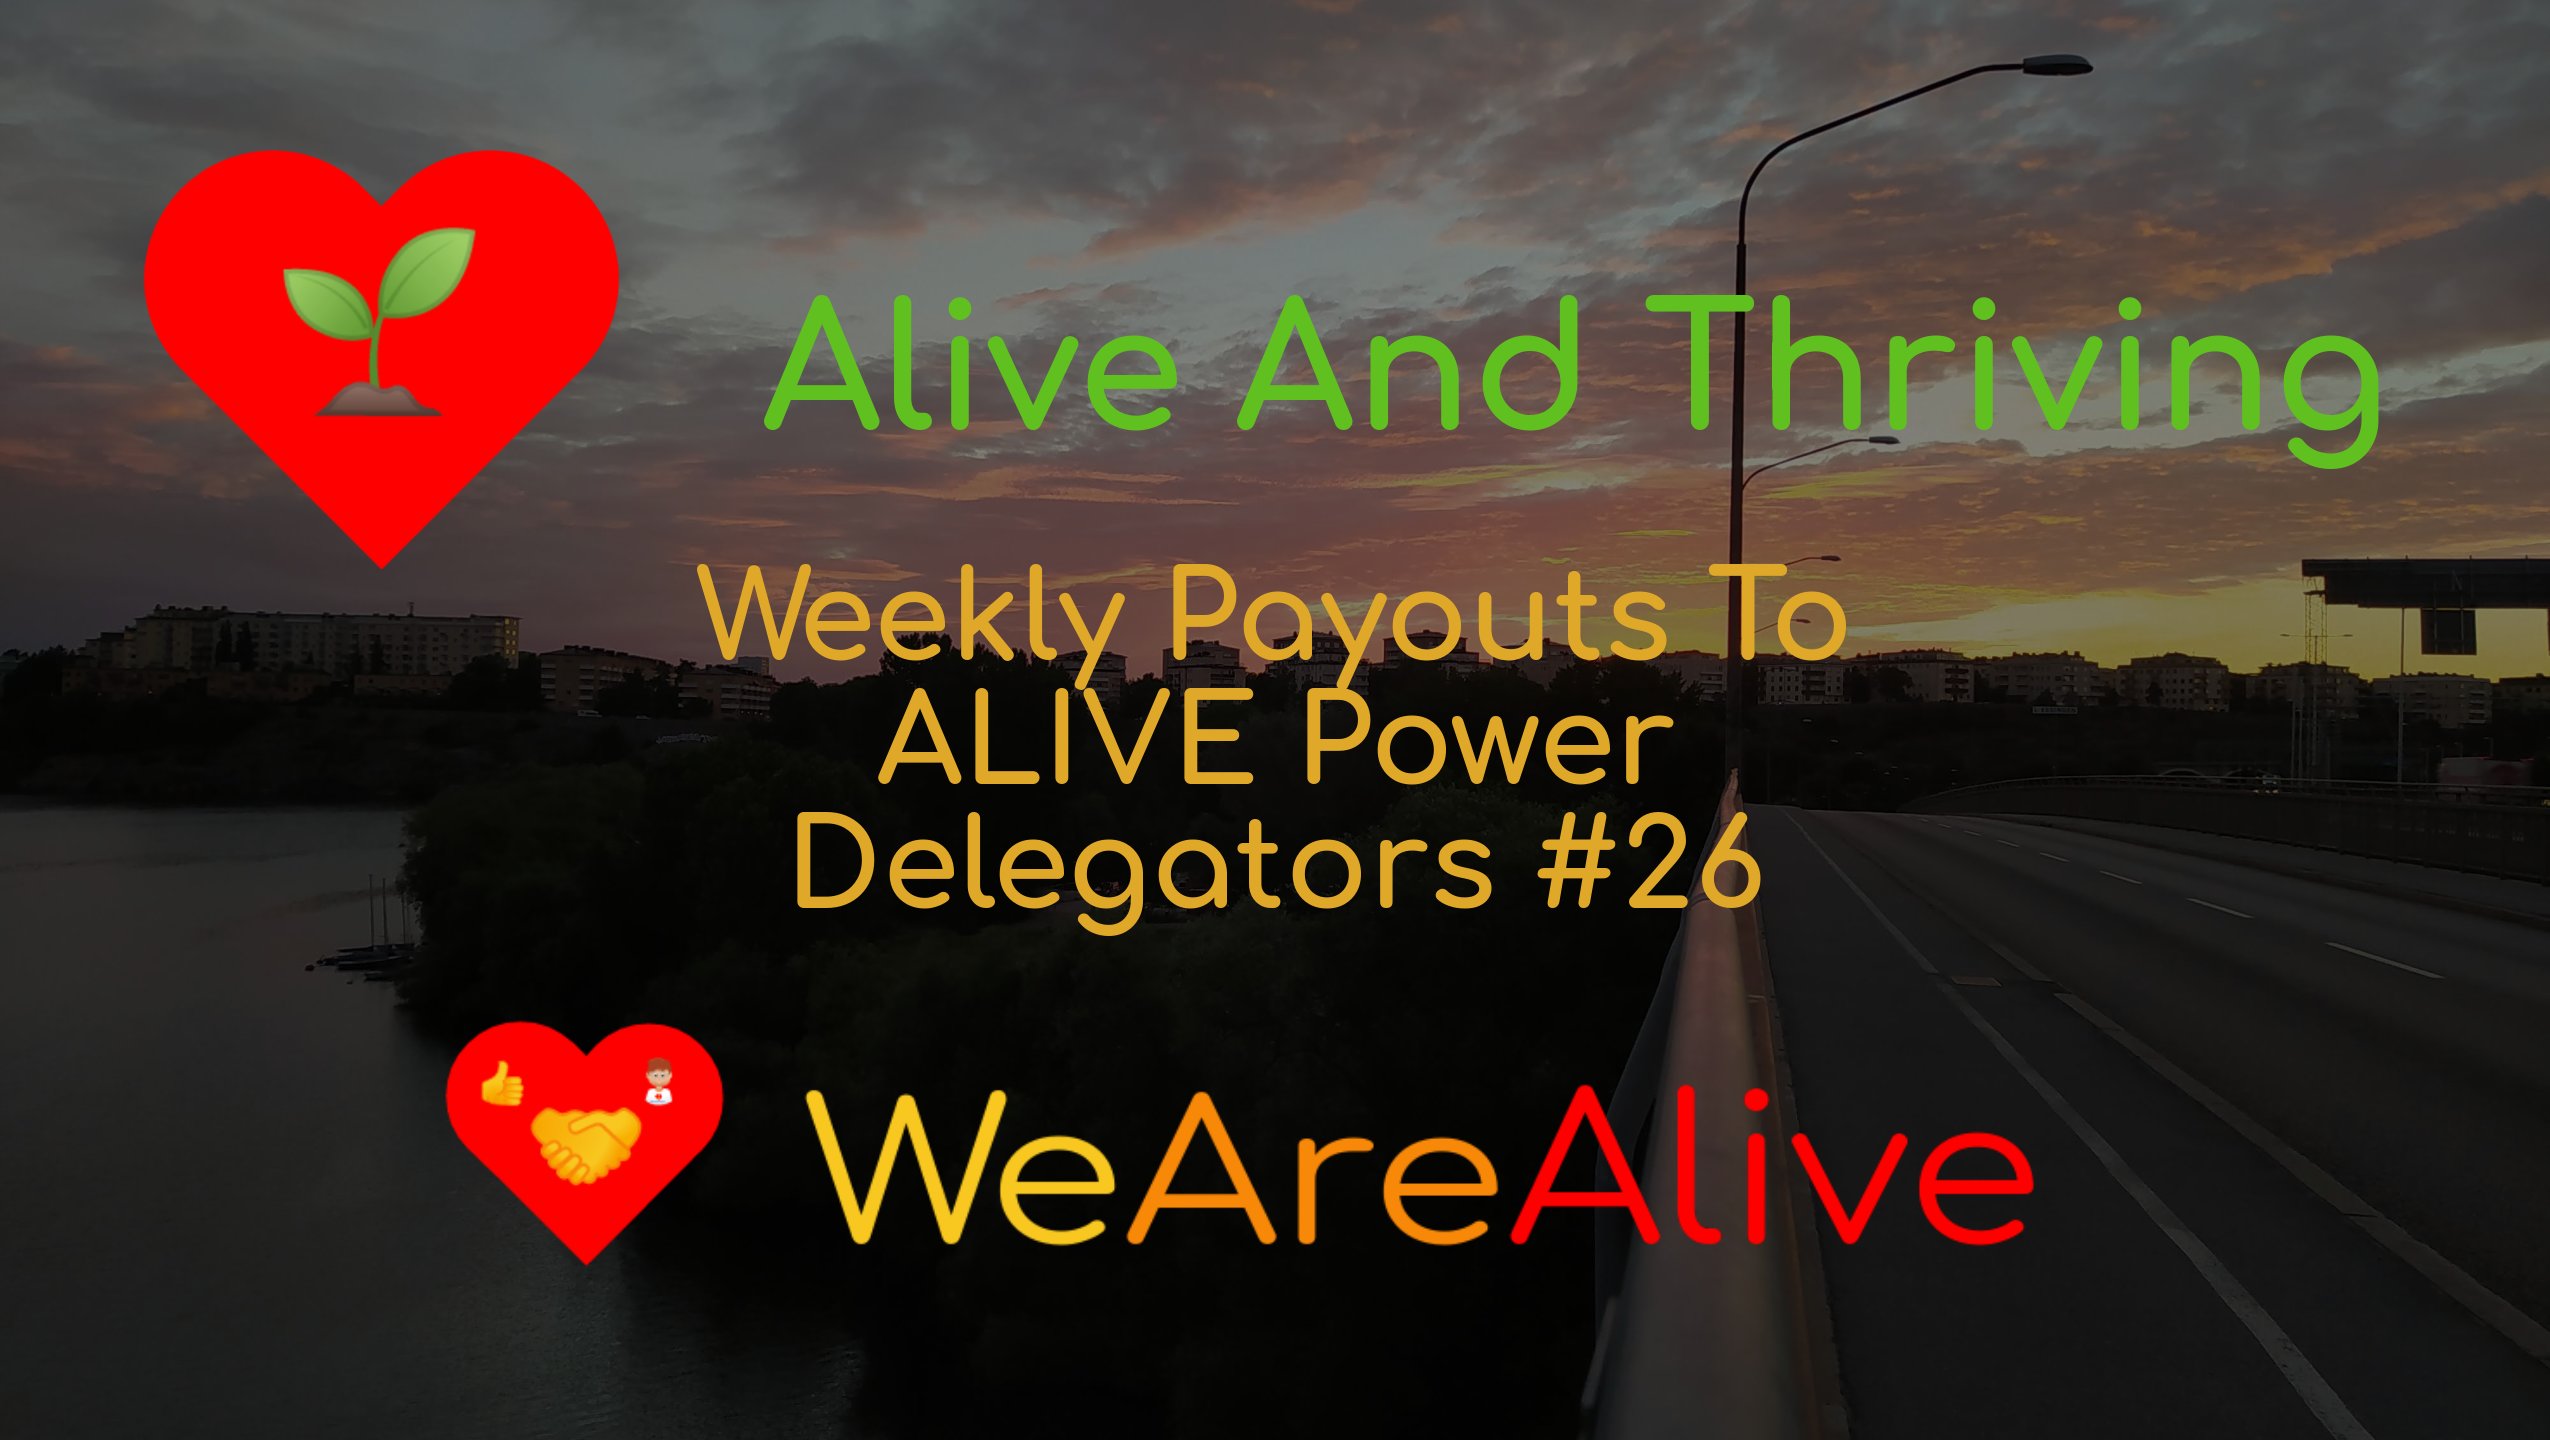 @wearealive/alive-and-thriving-weekly-payouts-to-alive-power-delegators-26